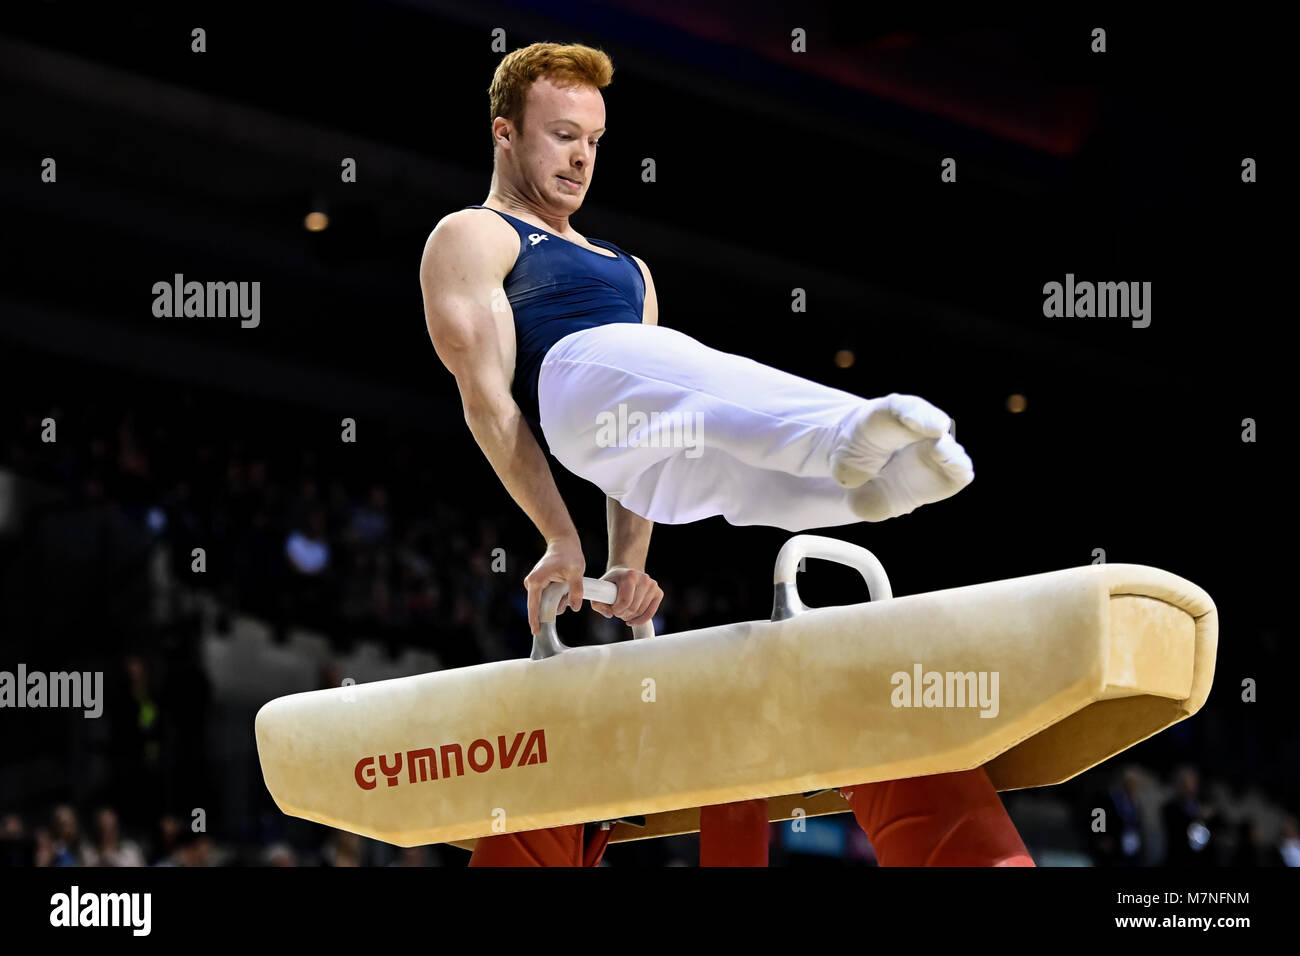 Echo Arena, Liverpool, UK. 11th Mar, 2018. Tony Duchars competes on the Pommel Horse during the WAG Senior Apparatus Final/MAG Masters of the 2018 Gymnastics British Championships at Echo Arena on Sunday, 11 March 2018. LIVERPOOL ENGLAND. Credit: Taka G Wu Credit: Taka Wu/Alamy Live News Stock Photo